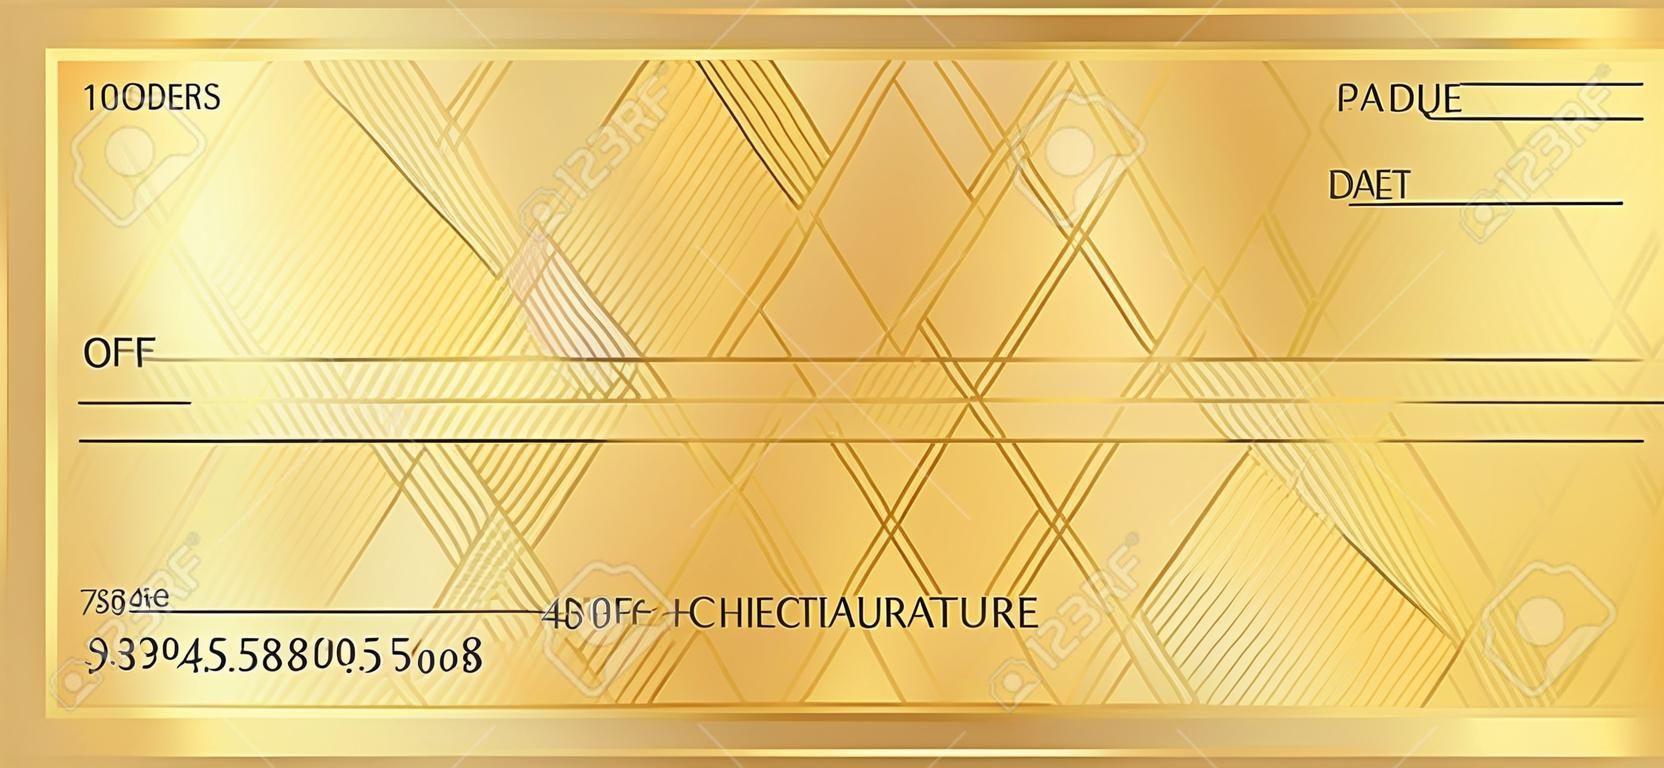 Cheque, Check, Chequebook template. Guilloche pattern with abstract geometric watermark. Golden background for banknote, money design, currency, bank note, Voucher, Gift certificate, Money coupon